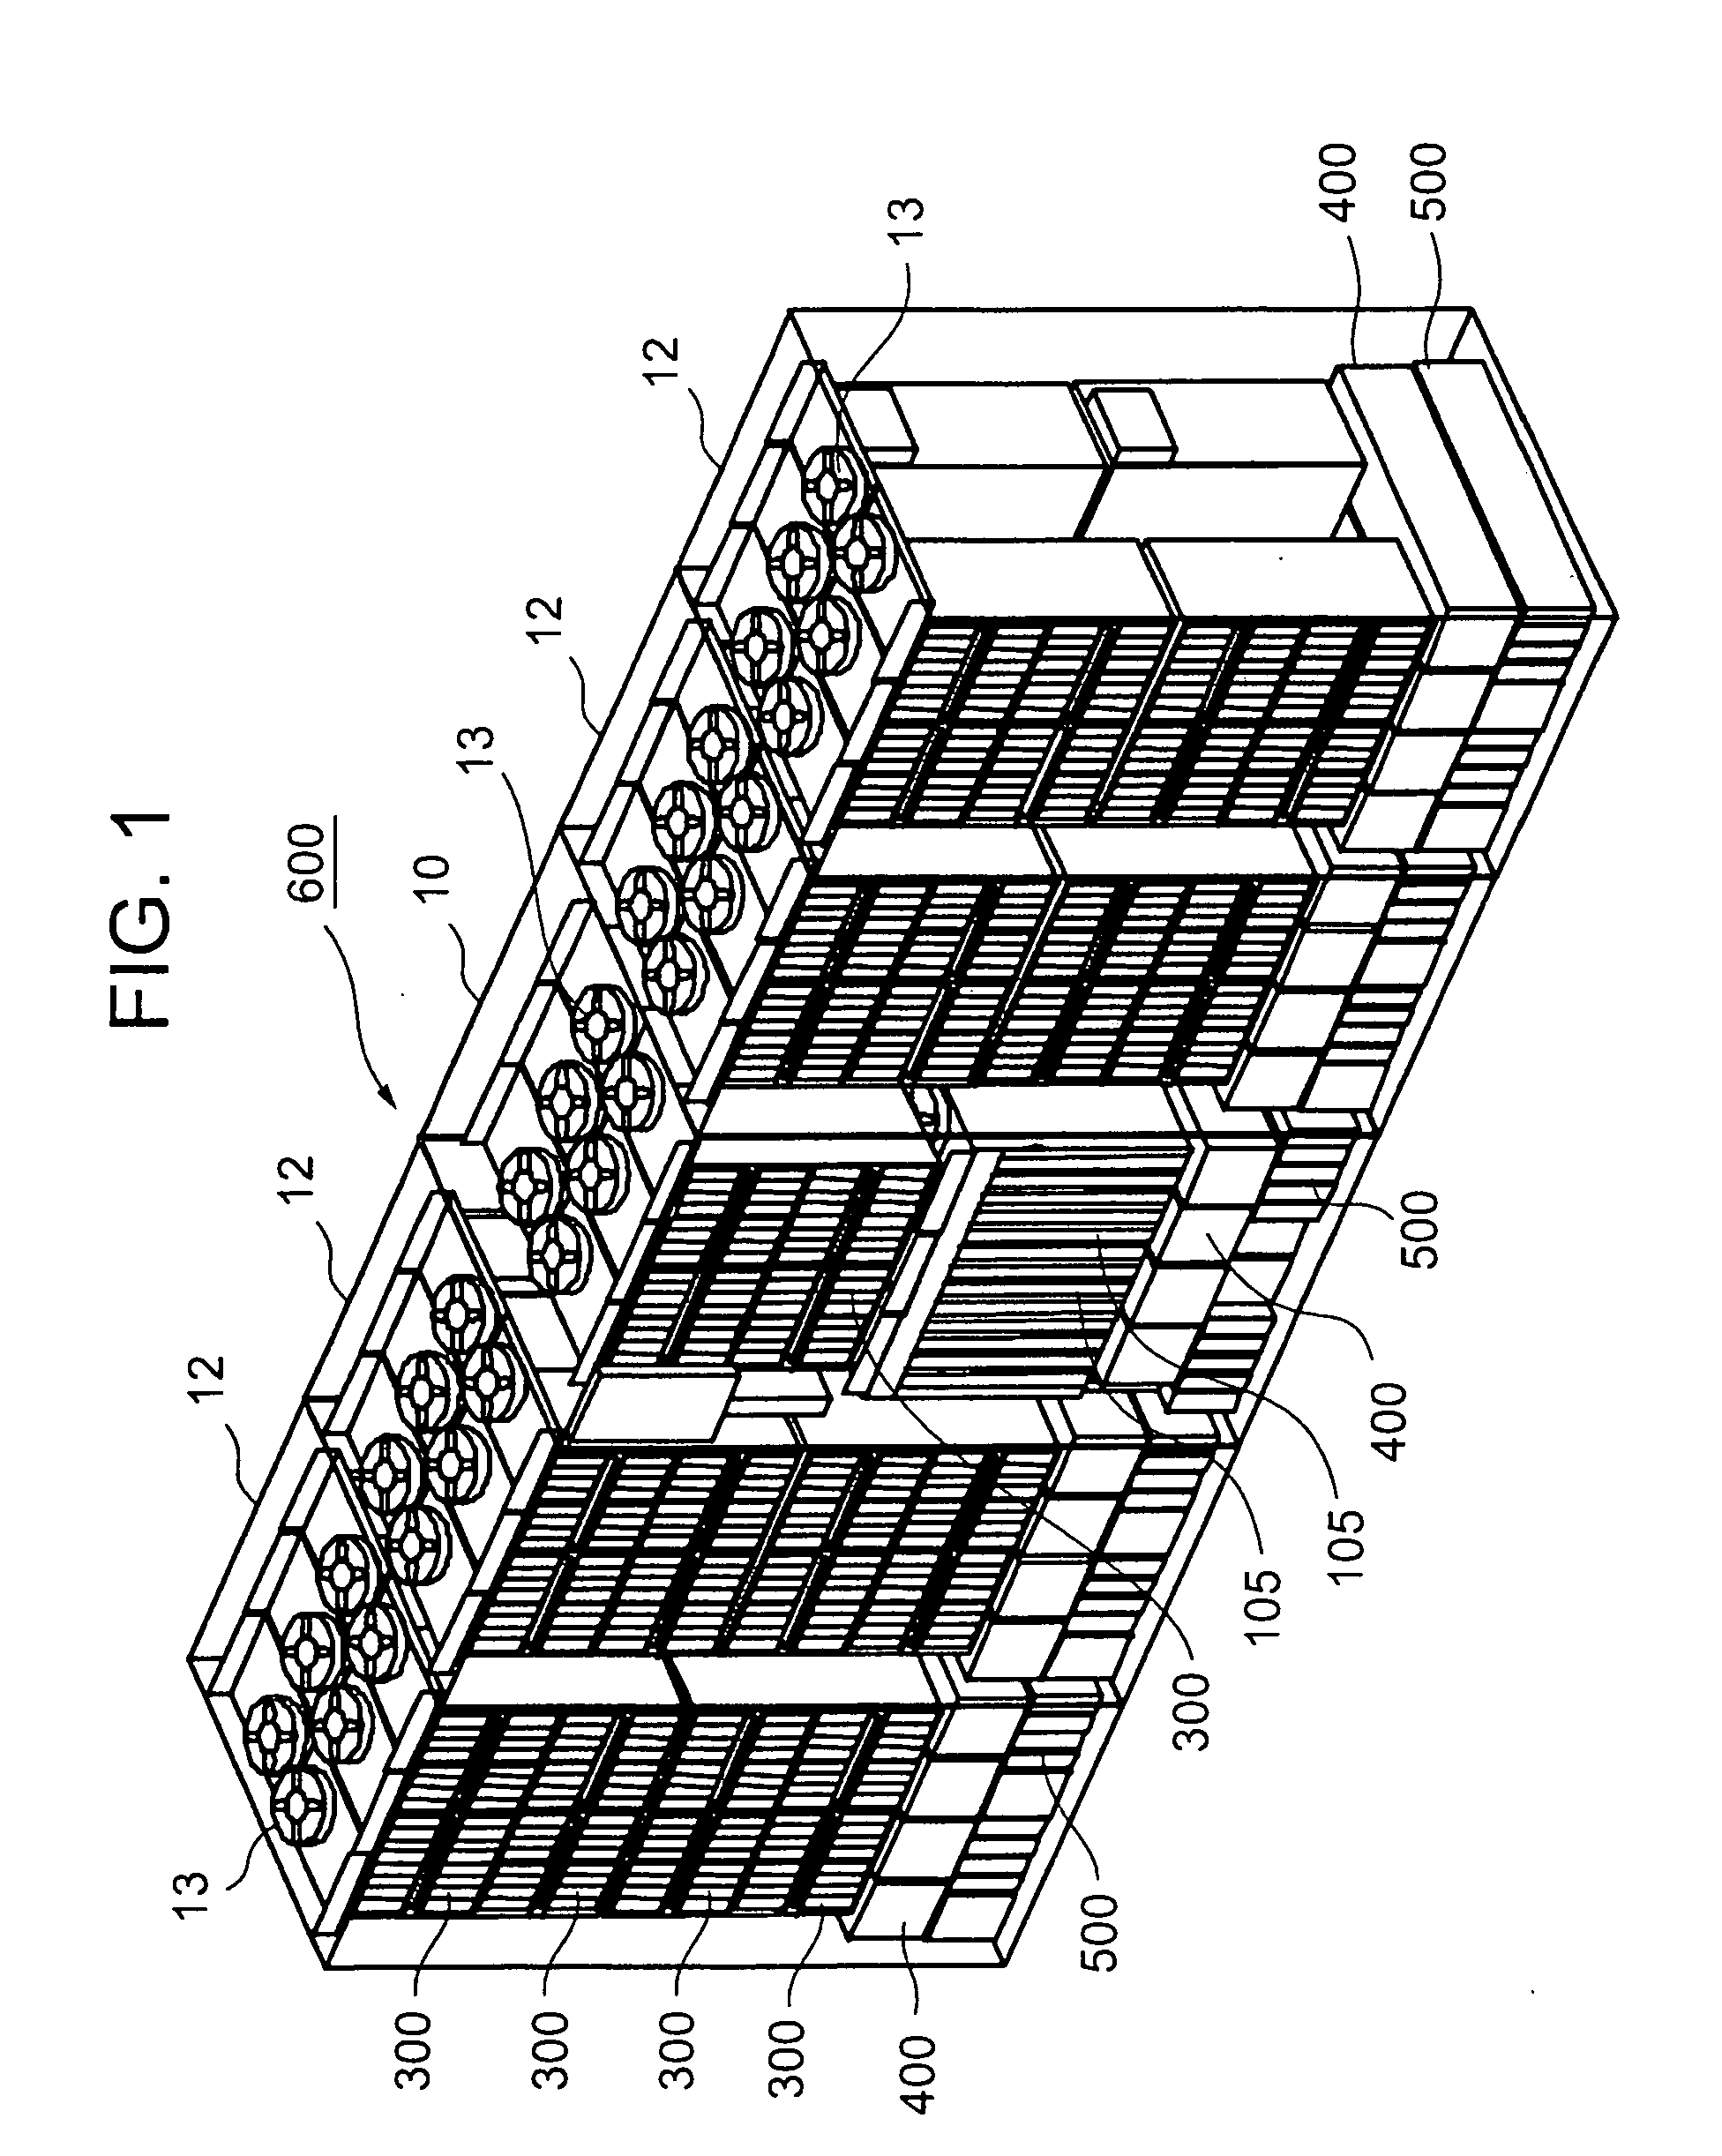 Efficient update of firmware in a disk-type storage device